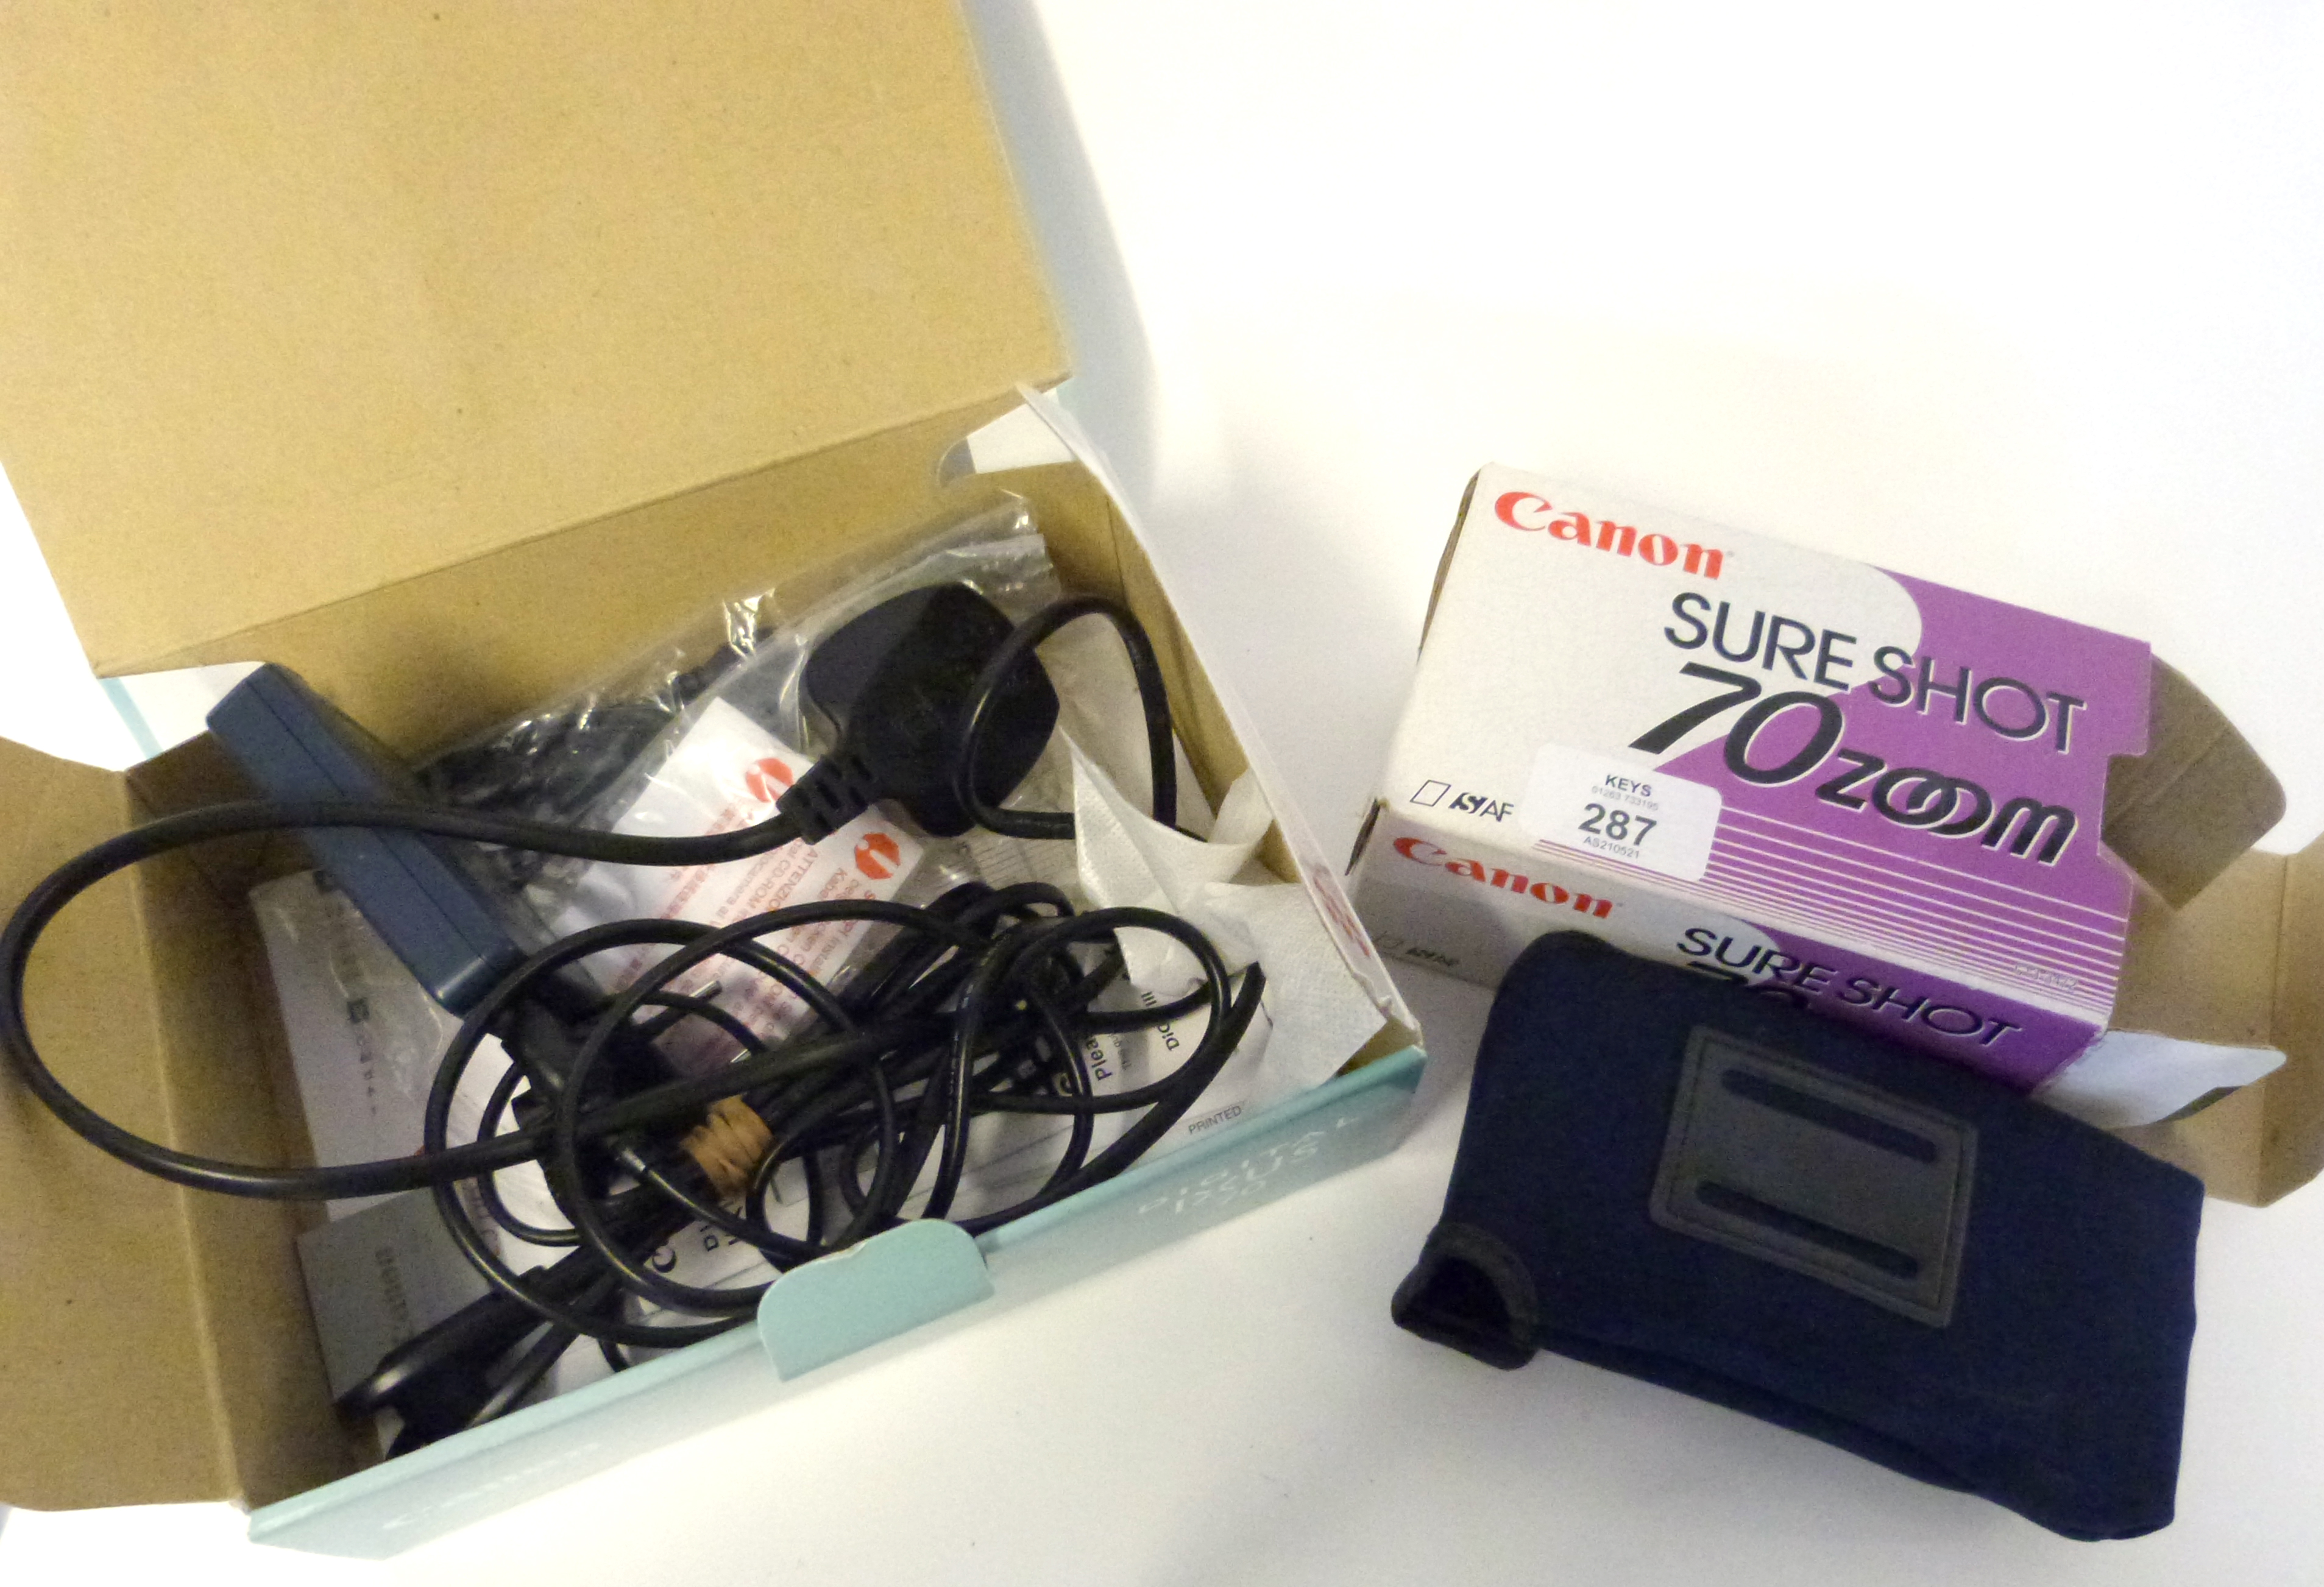 Canon Ixus 70 in box with accessories plus Canon Sureshot 70 zoom in box and accessories